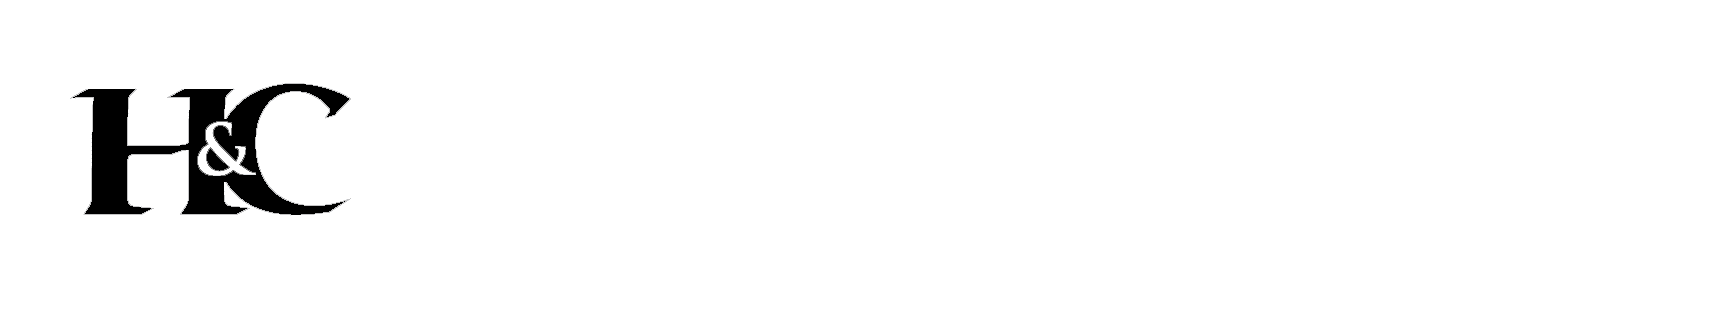 Hughes & Coleman Injury Lawyers Kentucky & Tennessee